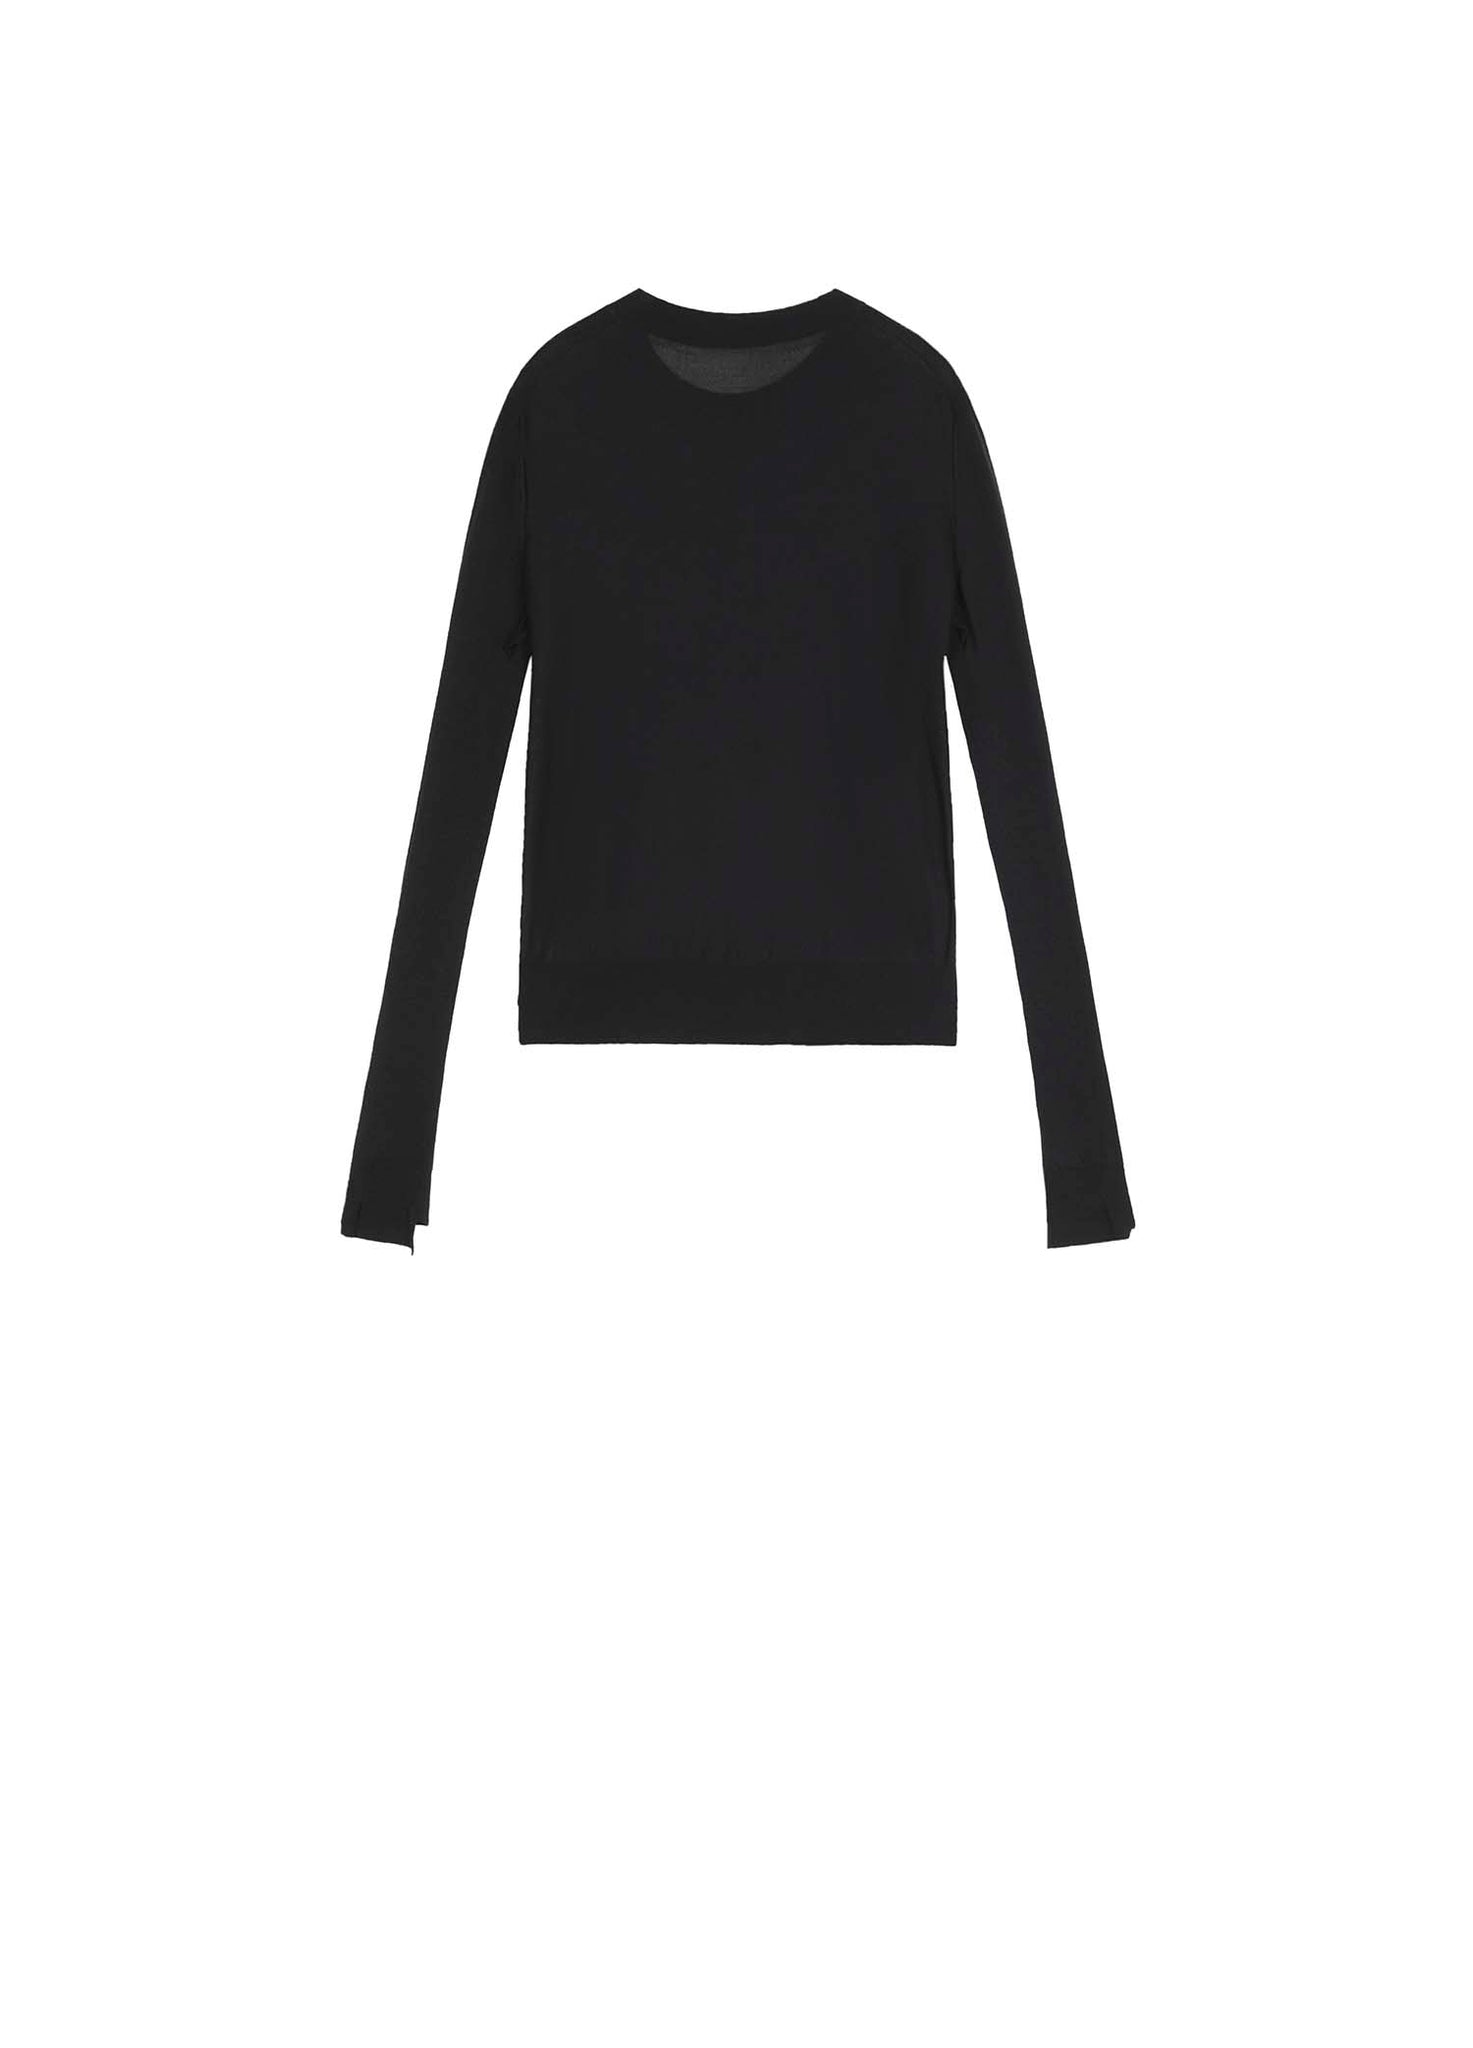 Sweater / JNBY Slim Fit Pullover Sweater